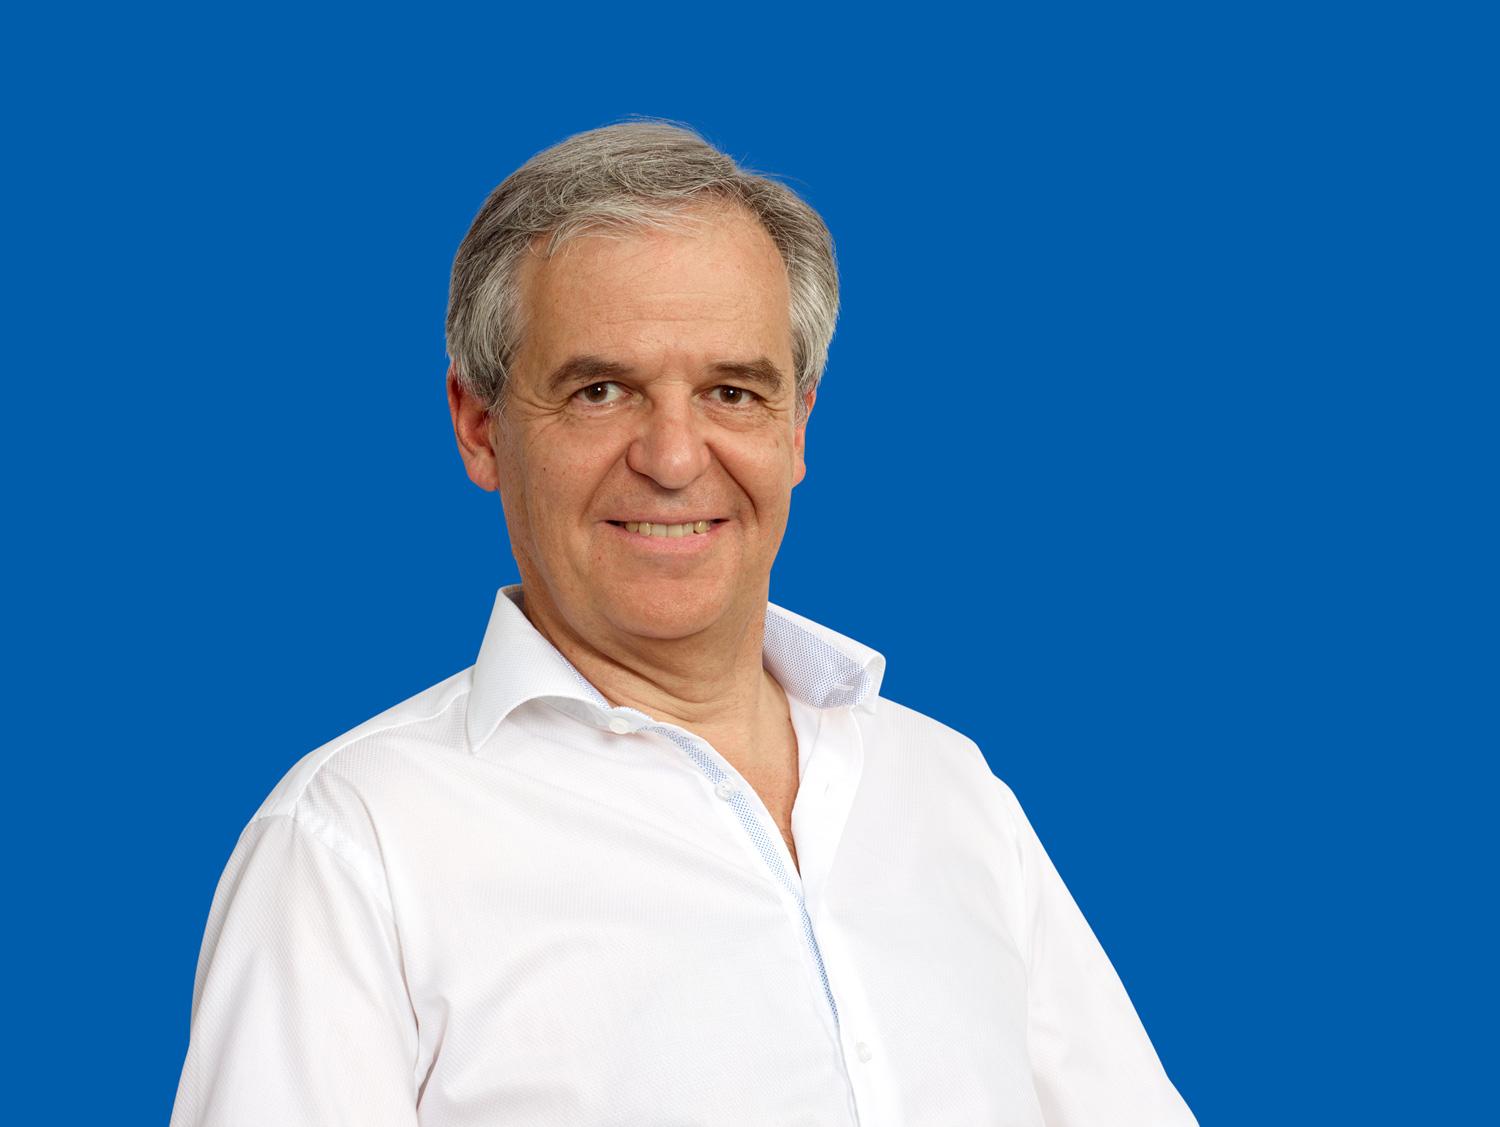 Profile picture for user Manfred Rösch